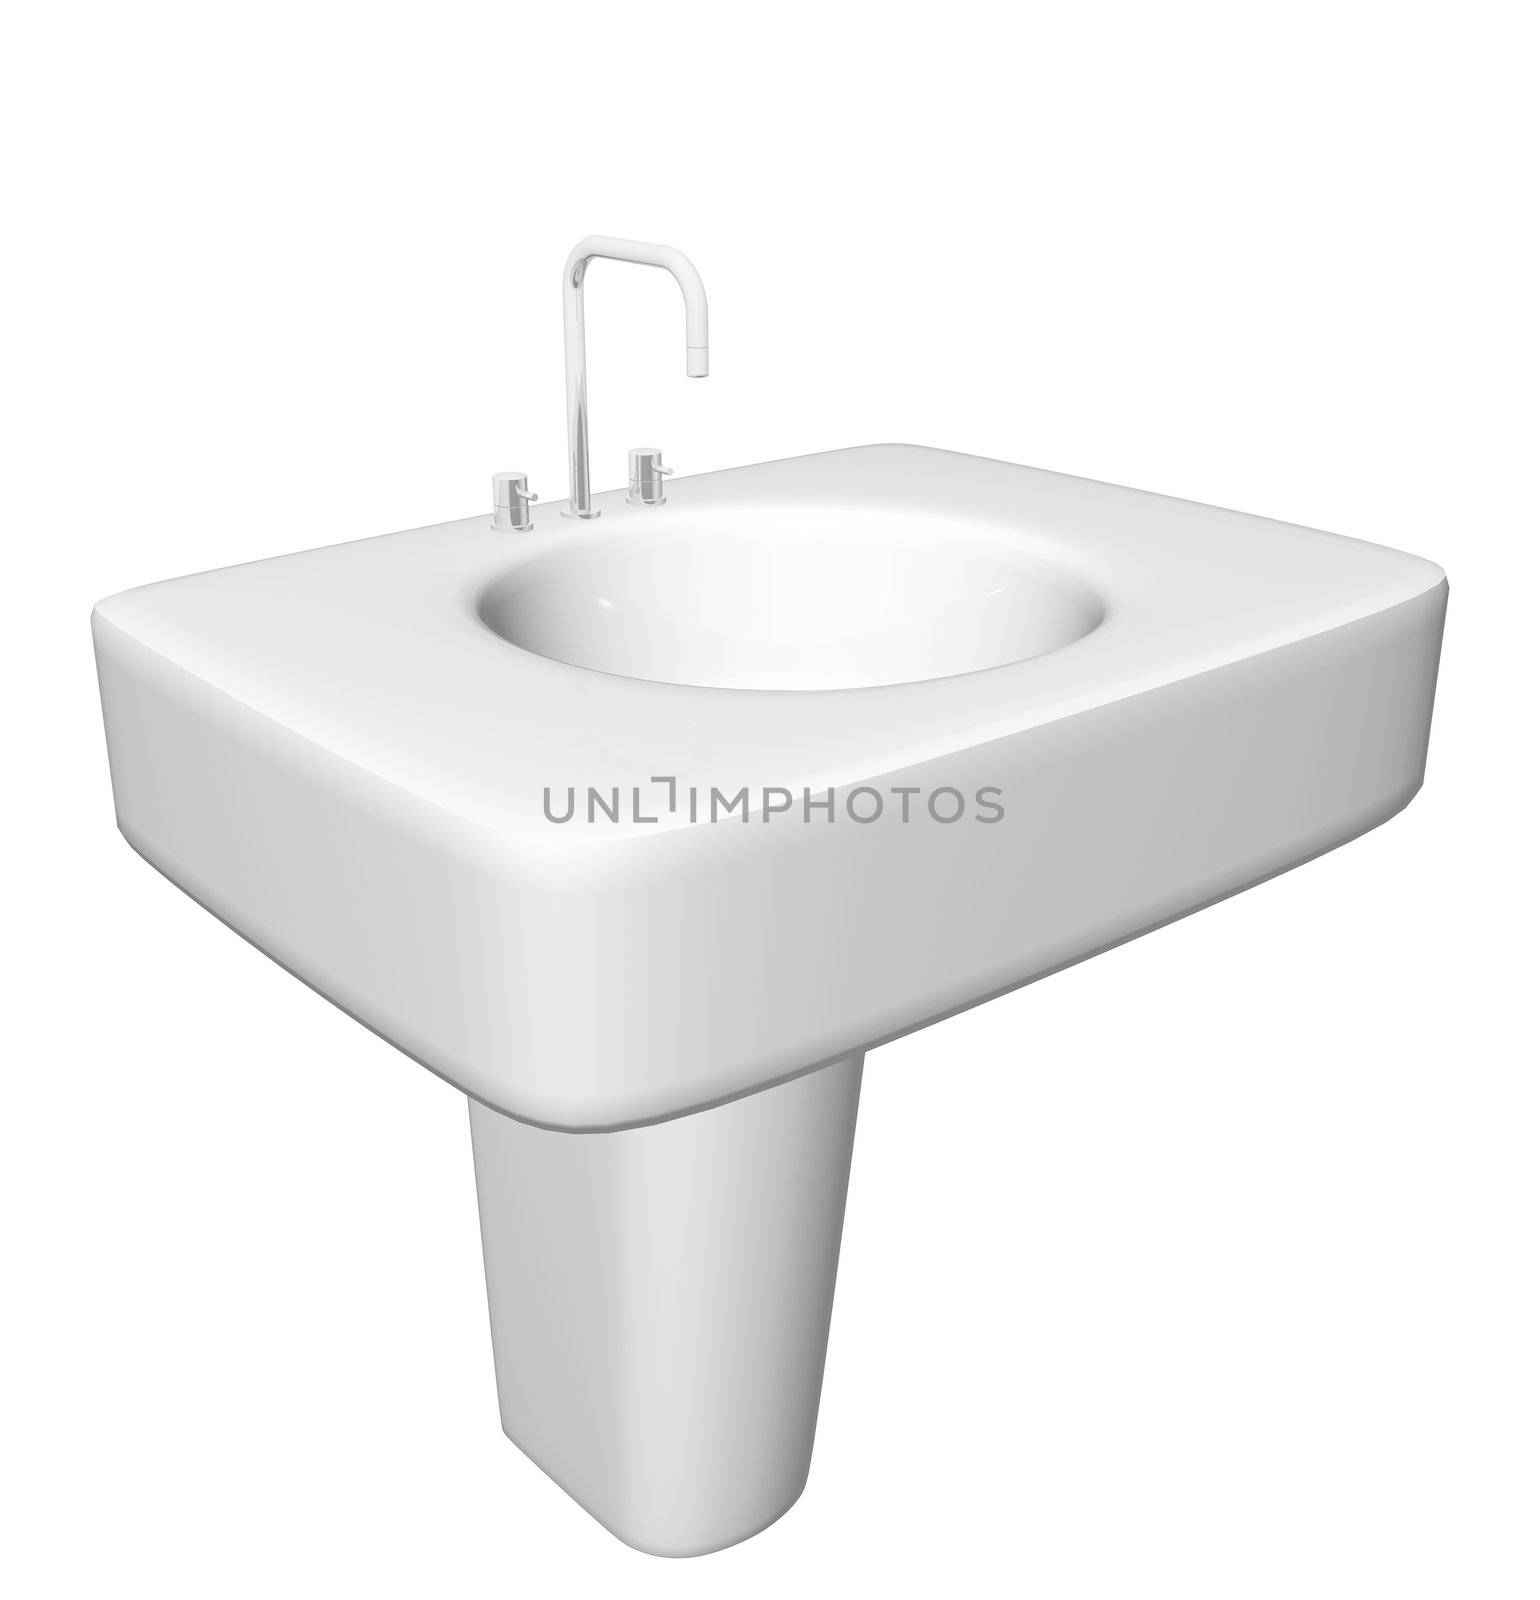 Modern washbasin or sink with faucet by Morphart